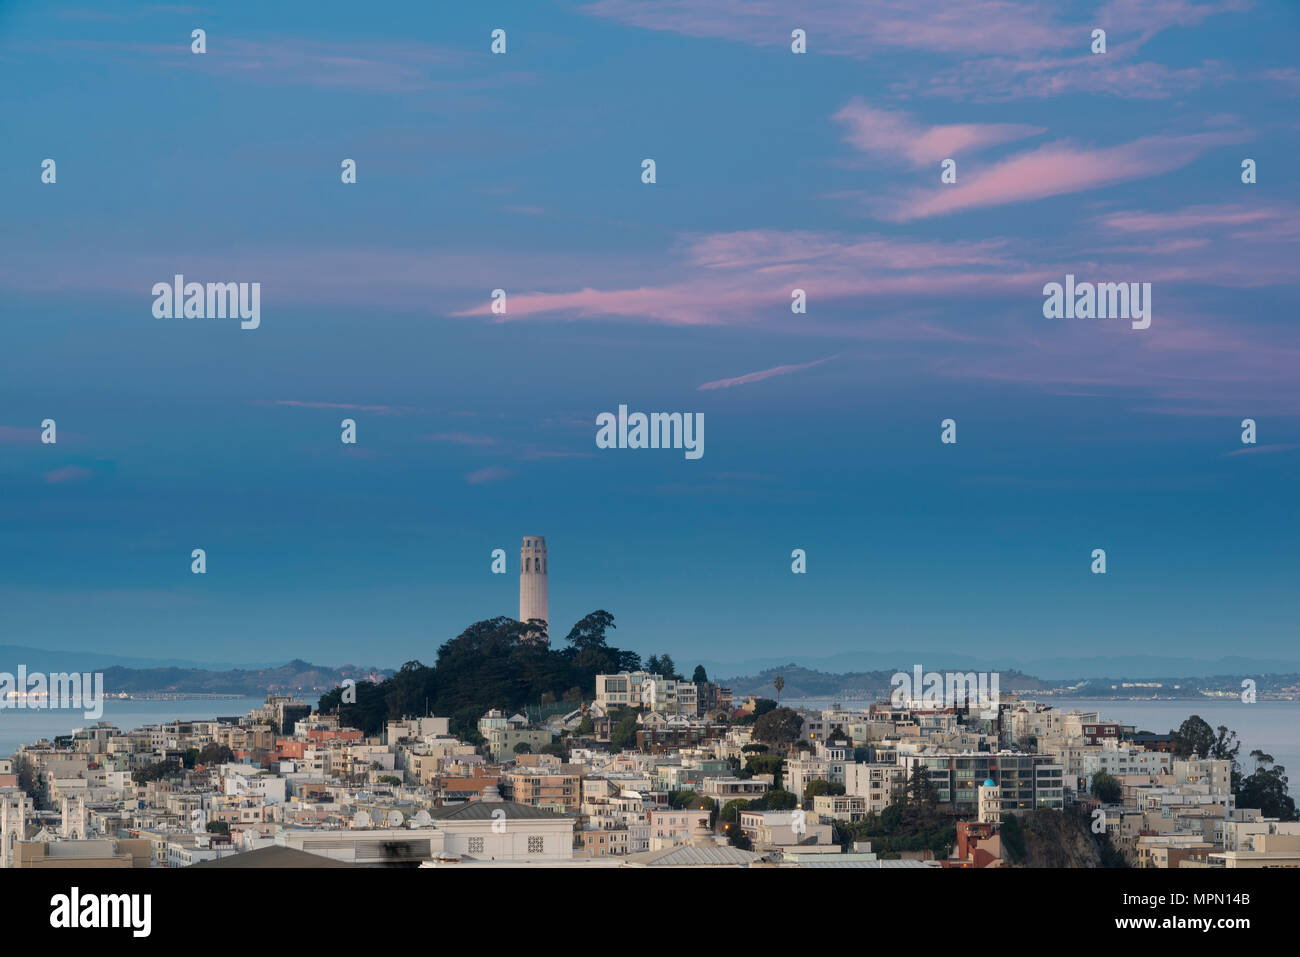 USA, California, San Francisco, Coit Tower and Telegraph Hill in the evening Stock Photo